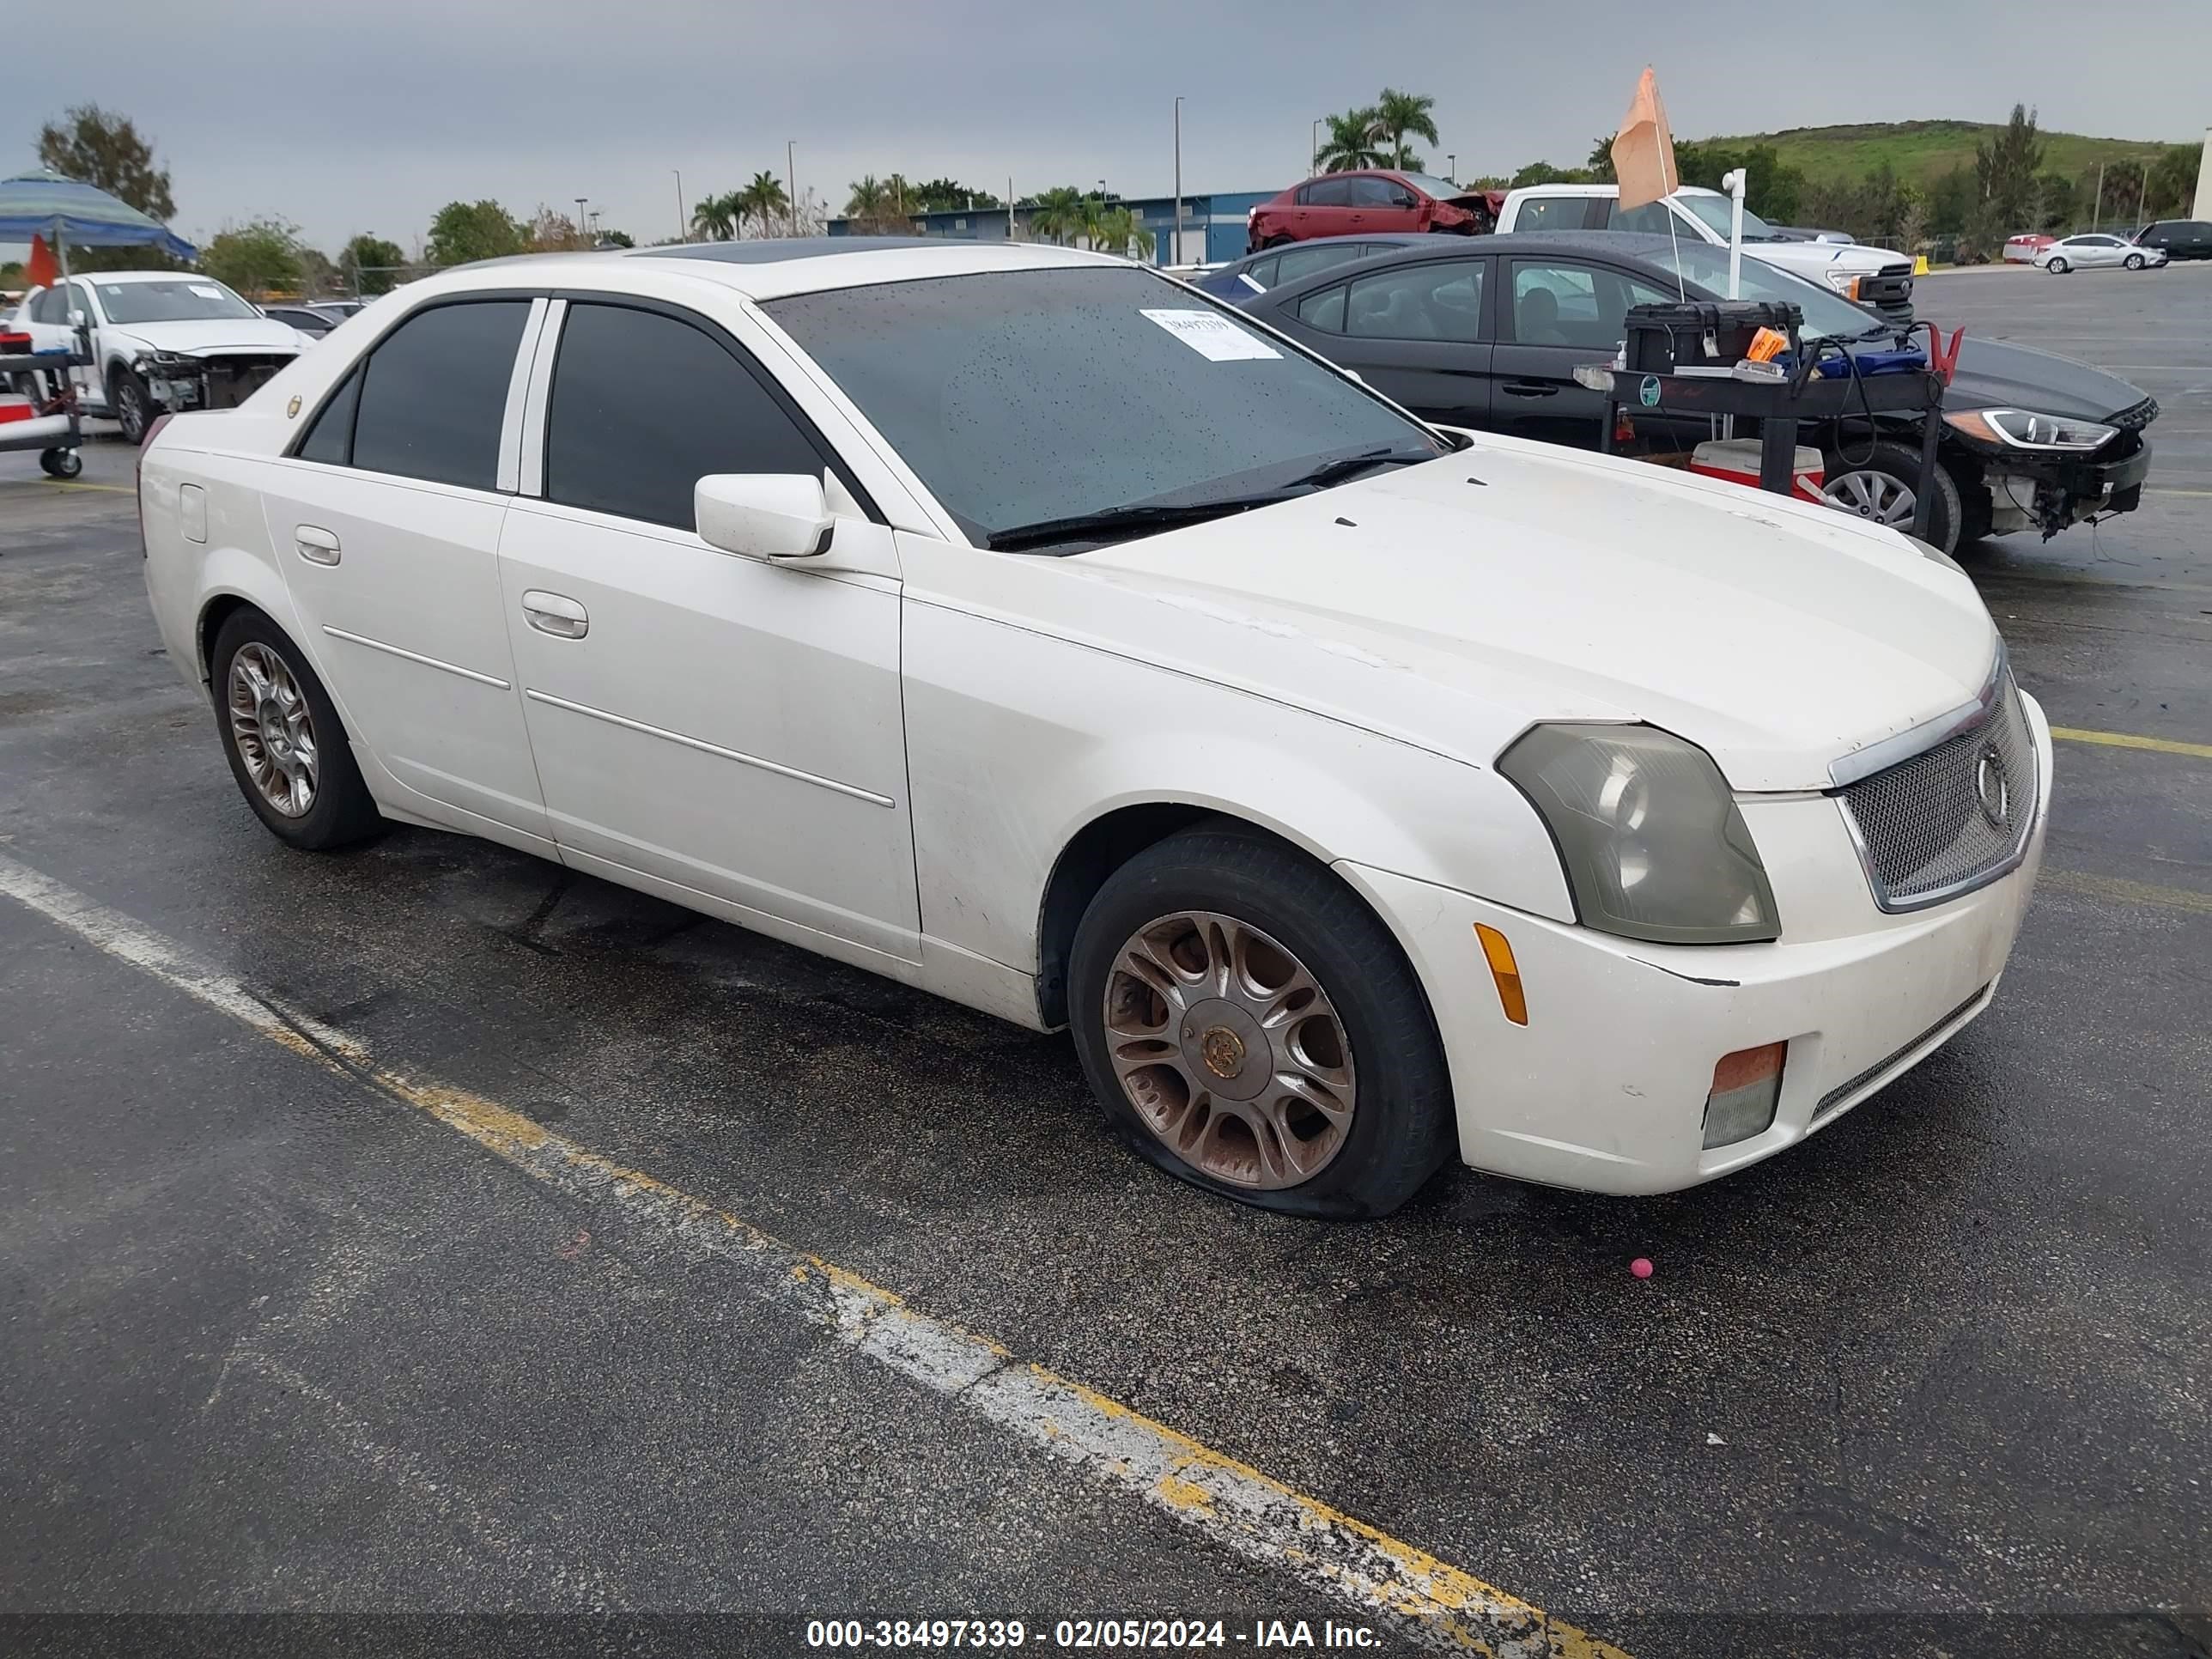 vin: 1G6DM577X40154083 1G6DM577X40154083 2004 cadillac cts 3600 for Sale in 33332, 20499 Stirling Road, Southwest Ranch, USA